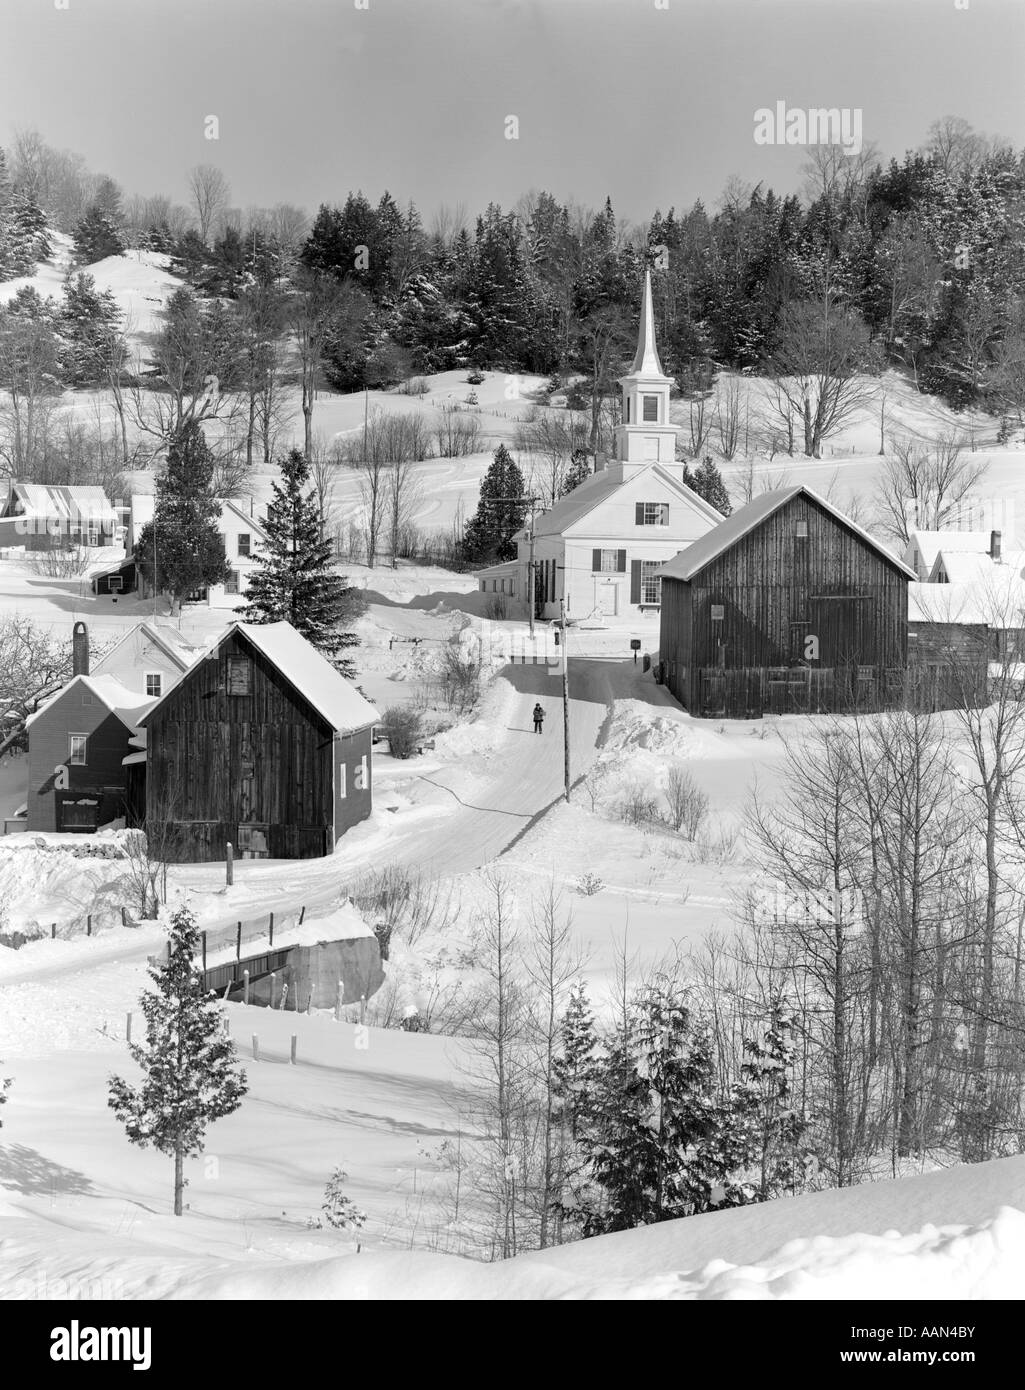 1970s WINTER SCENIC OF WAITS RIVER JUNCTION VERMONT Stock Photo